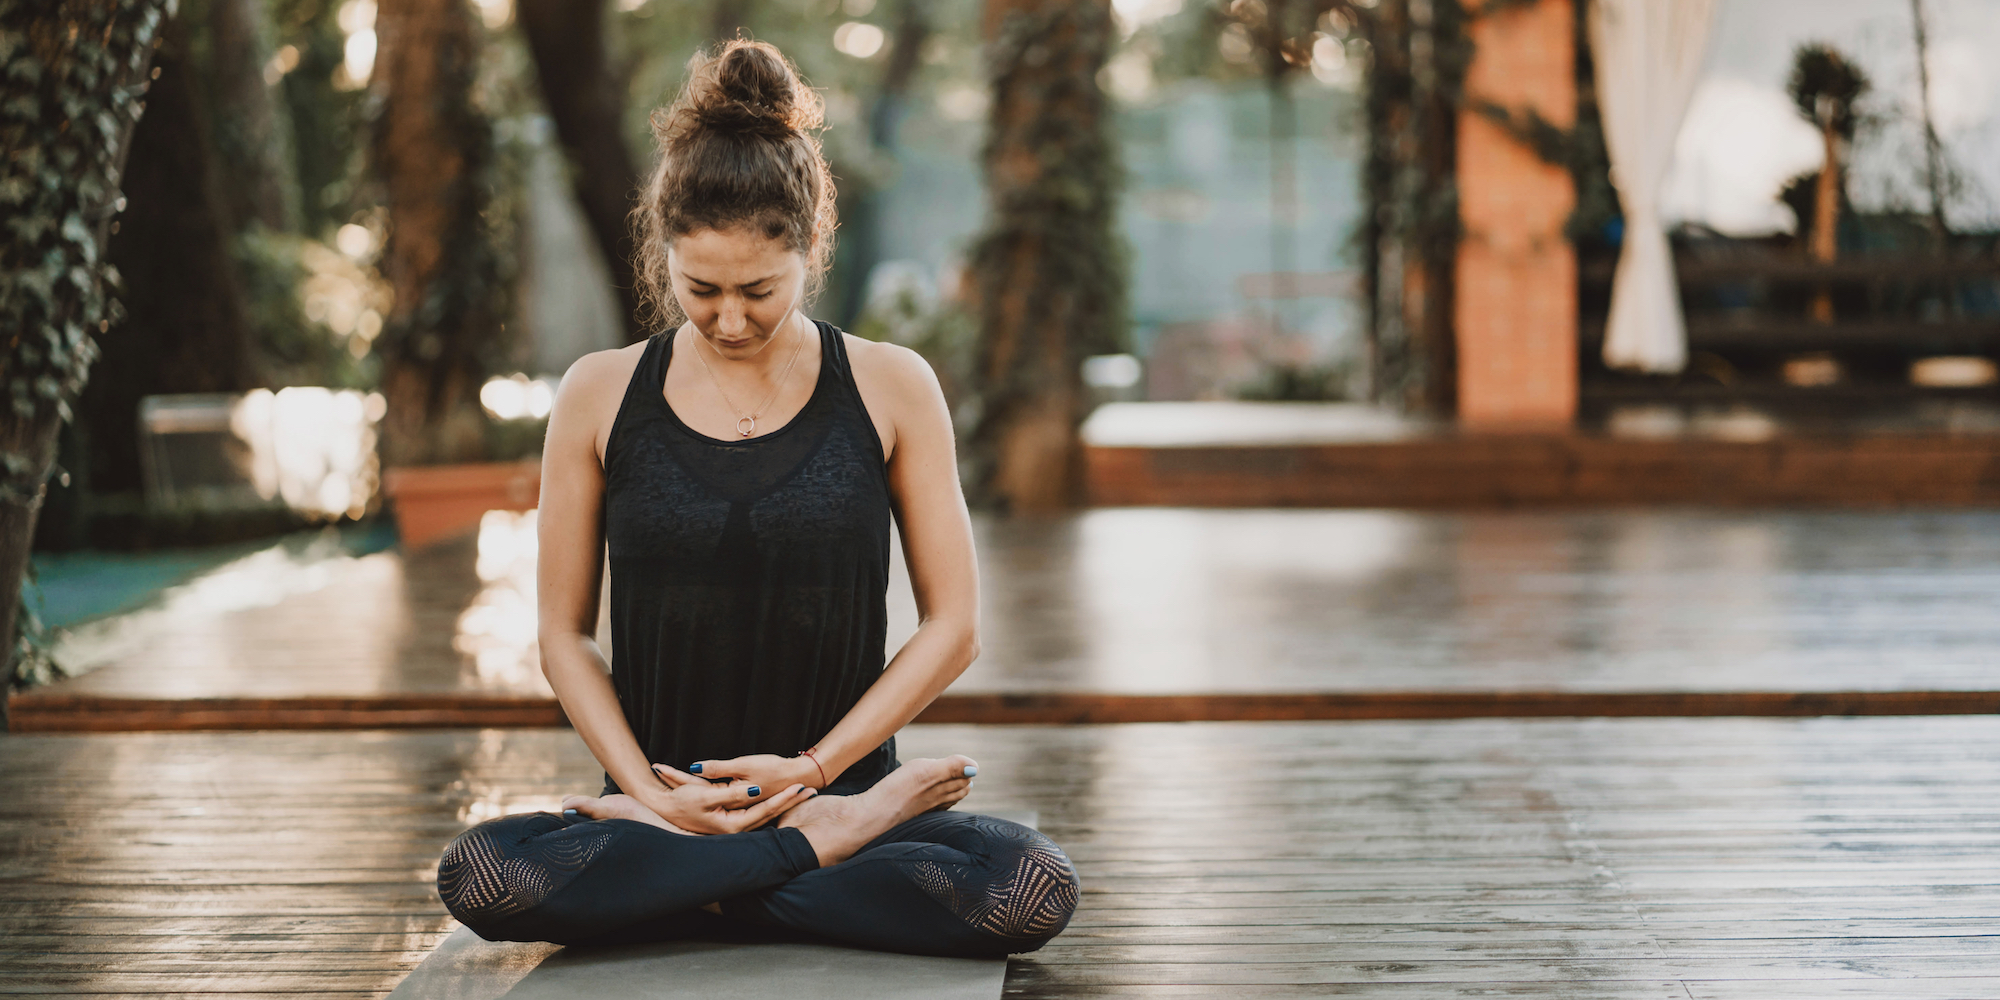 Why You Should Use a Yoga Block for Seated Meditation